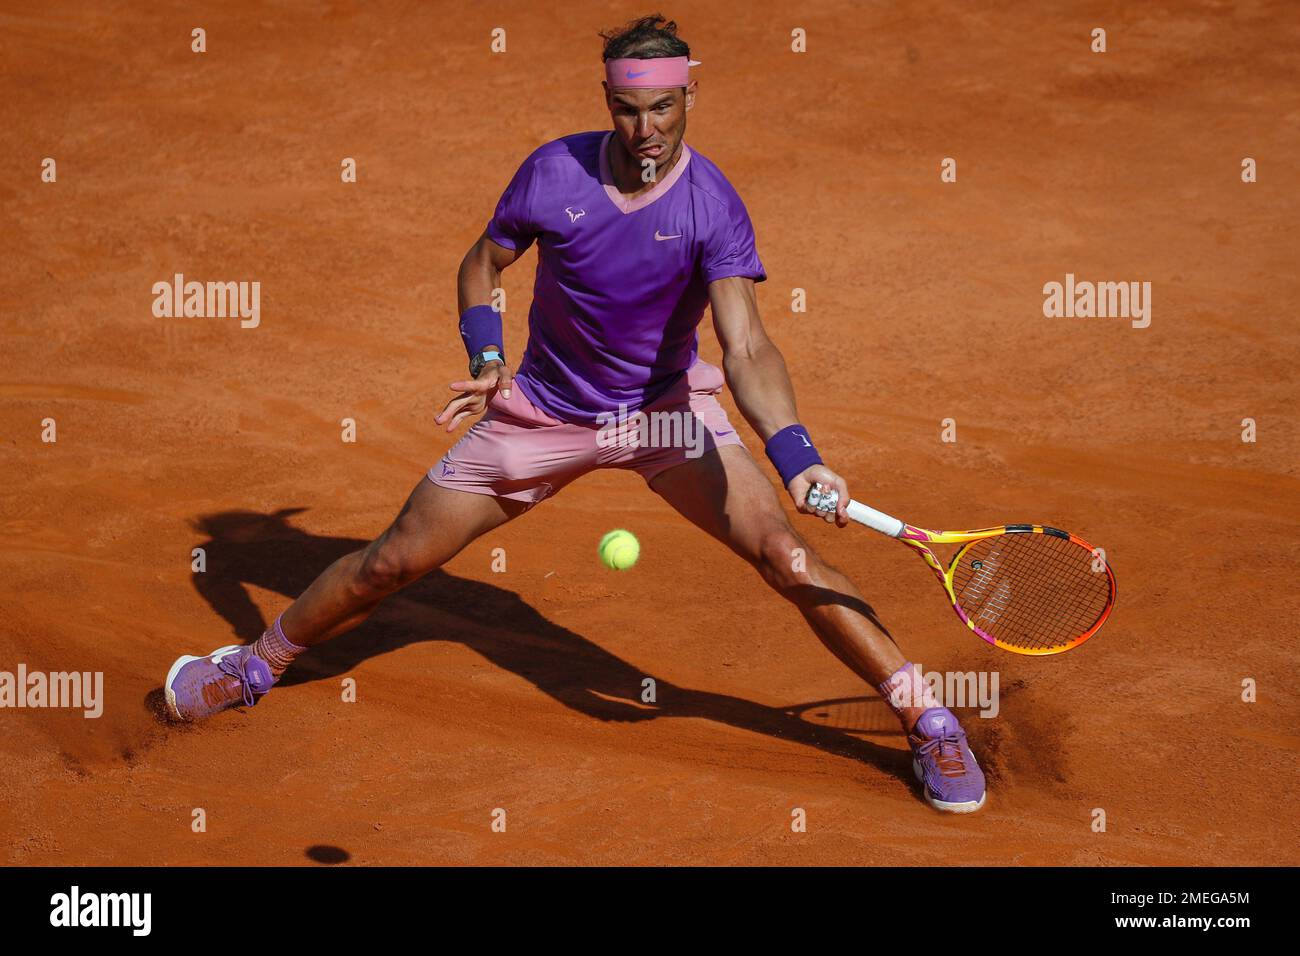 Spains Rafael Nadal returns the ball to Canadas Denis Shapovalov, during their 3rd round match at the Italian Open tennis tournament, in Rome, Thursday, May 13, 2021